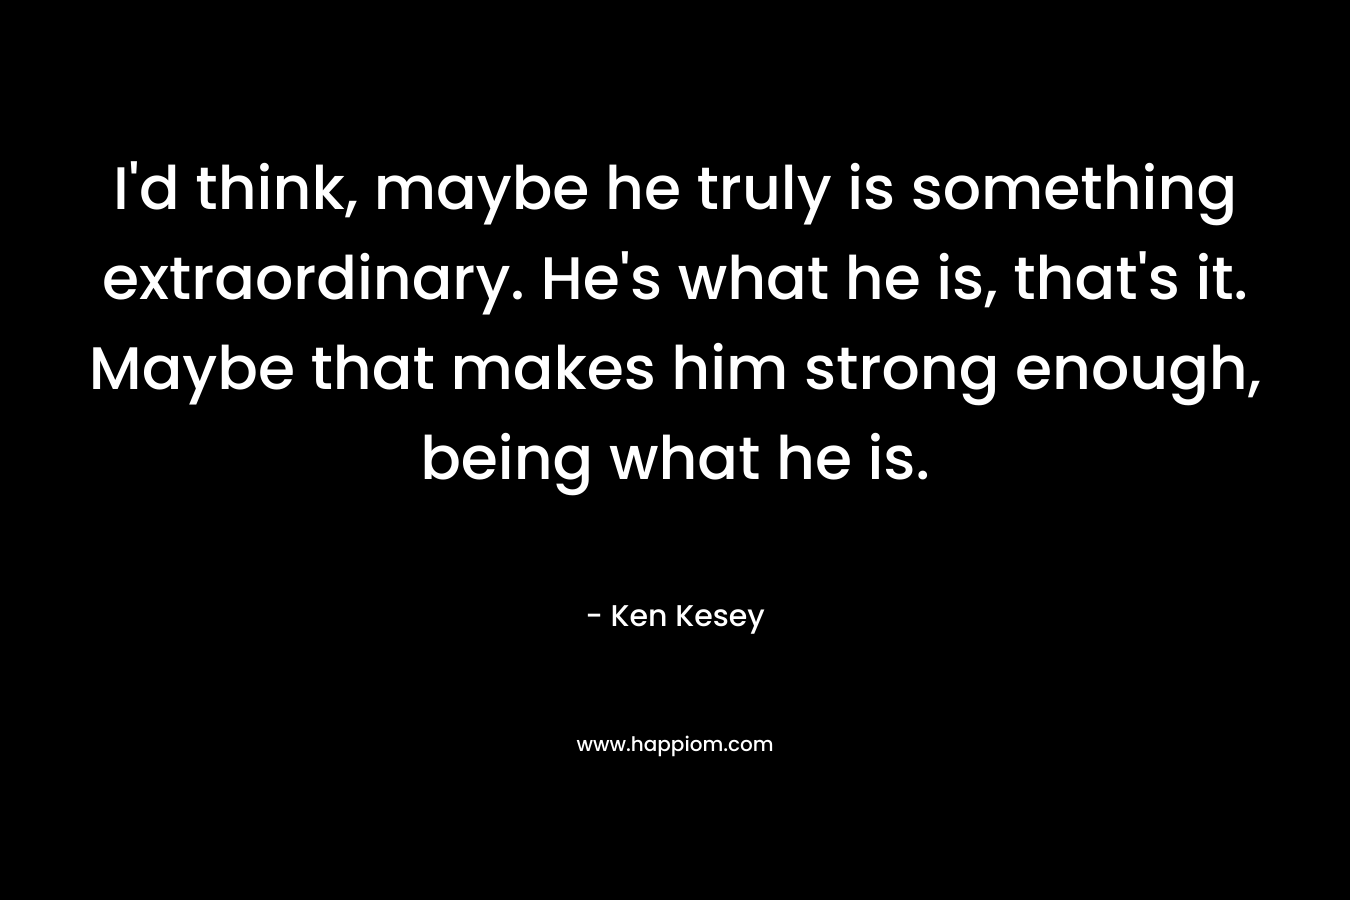 I’d think, maybe he truly is something extraordinary. He’s what he is, that’s it. Maybe that makes him strong enough, being what he is. – Ken Kesey